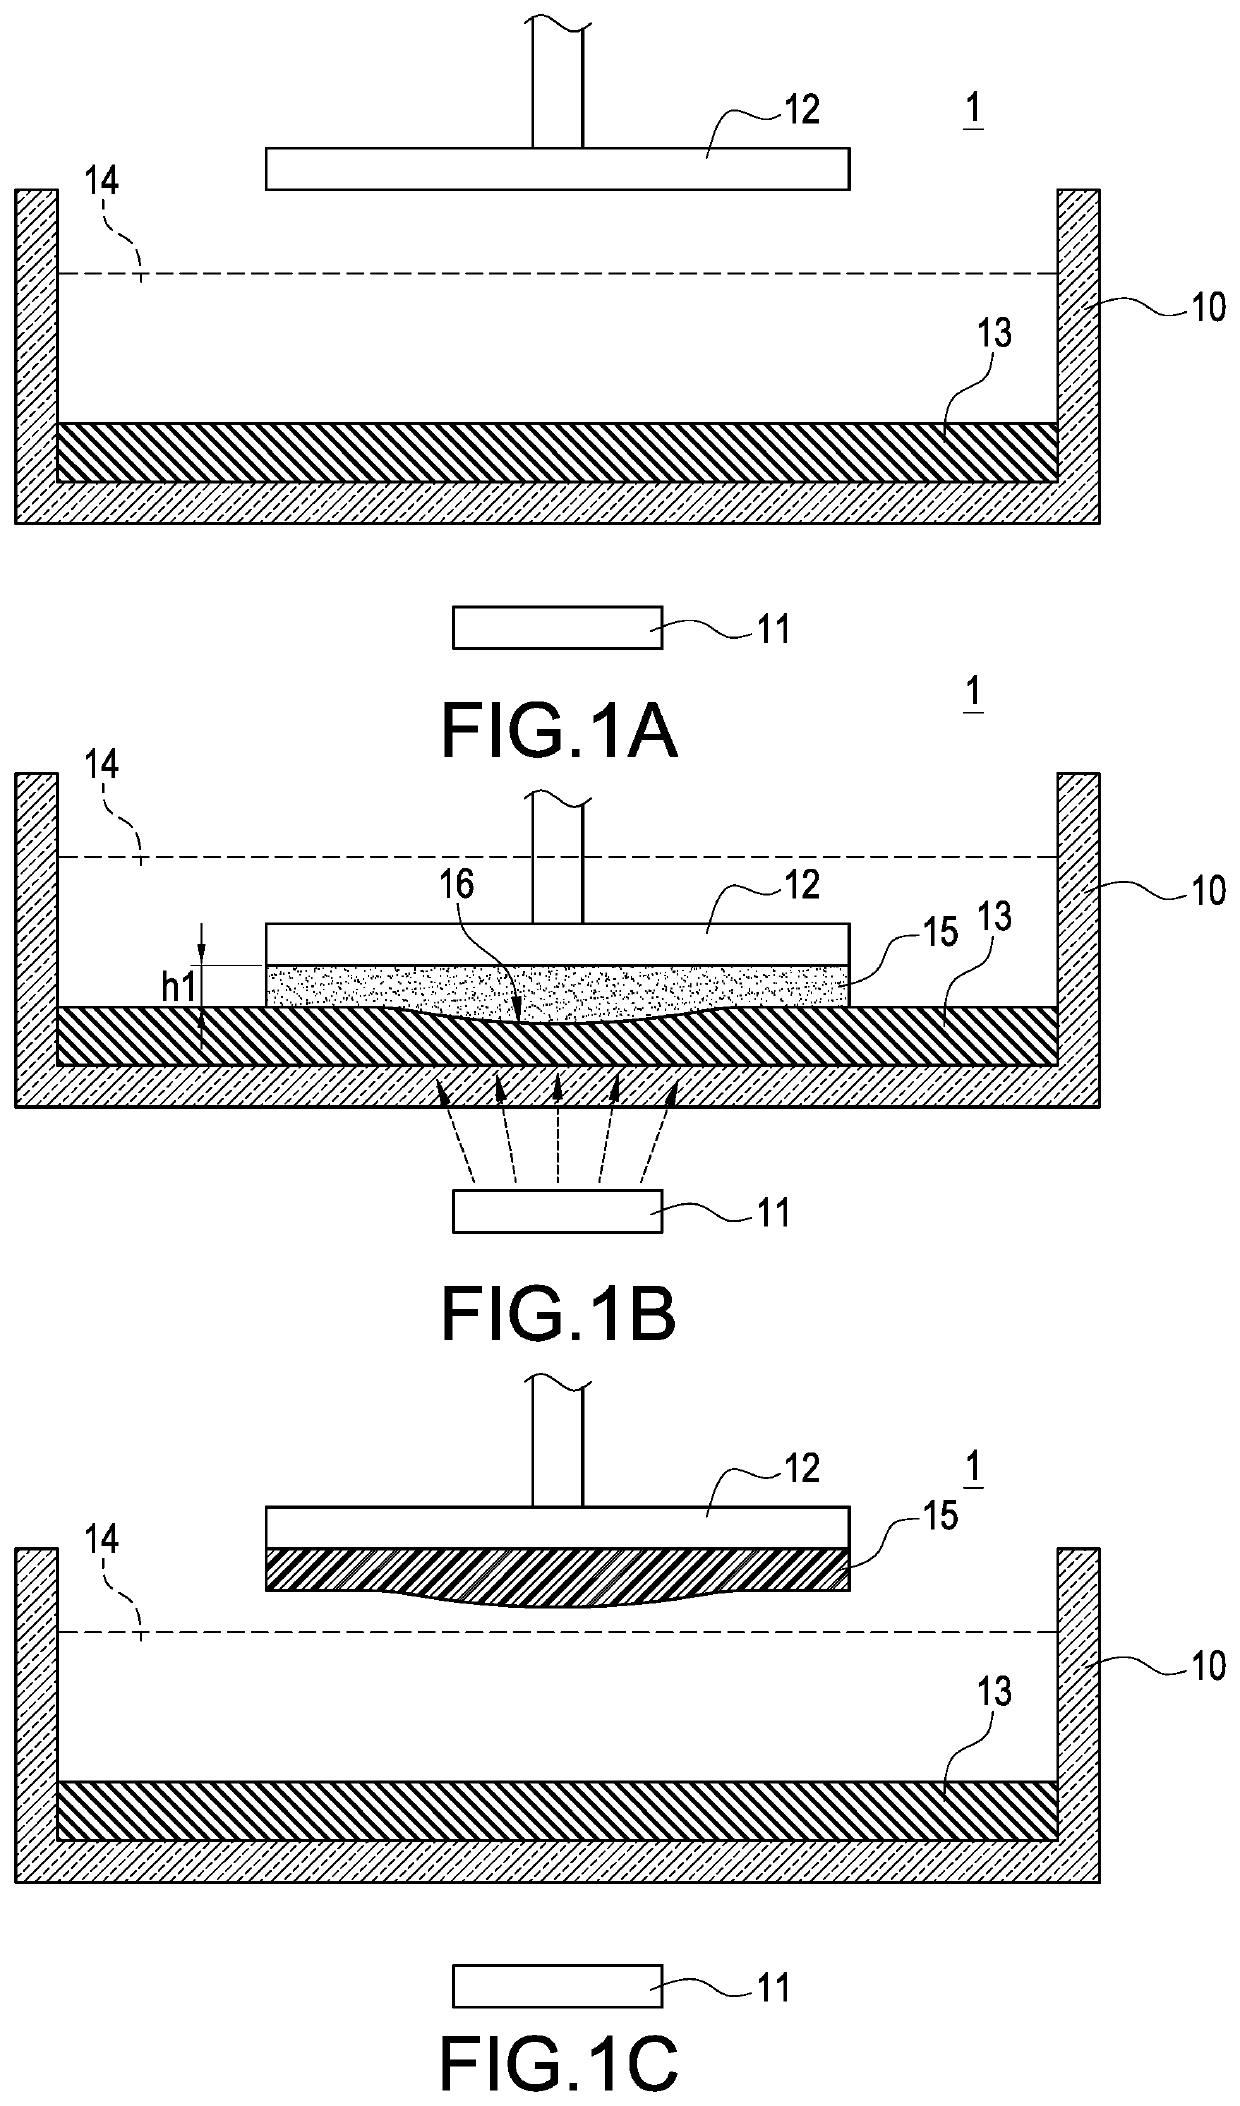 Method of making surfaces smooth or flat for 3D printing